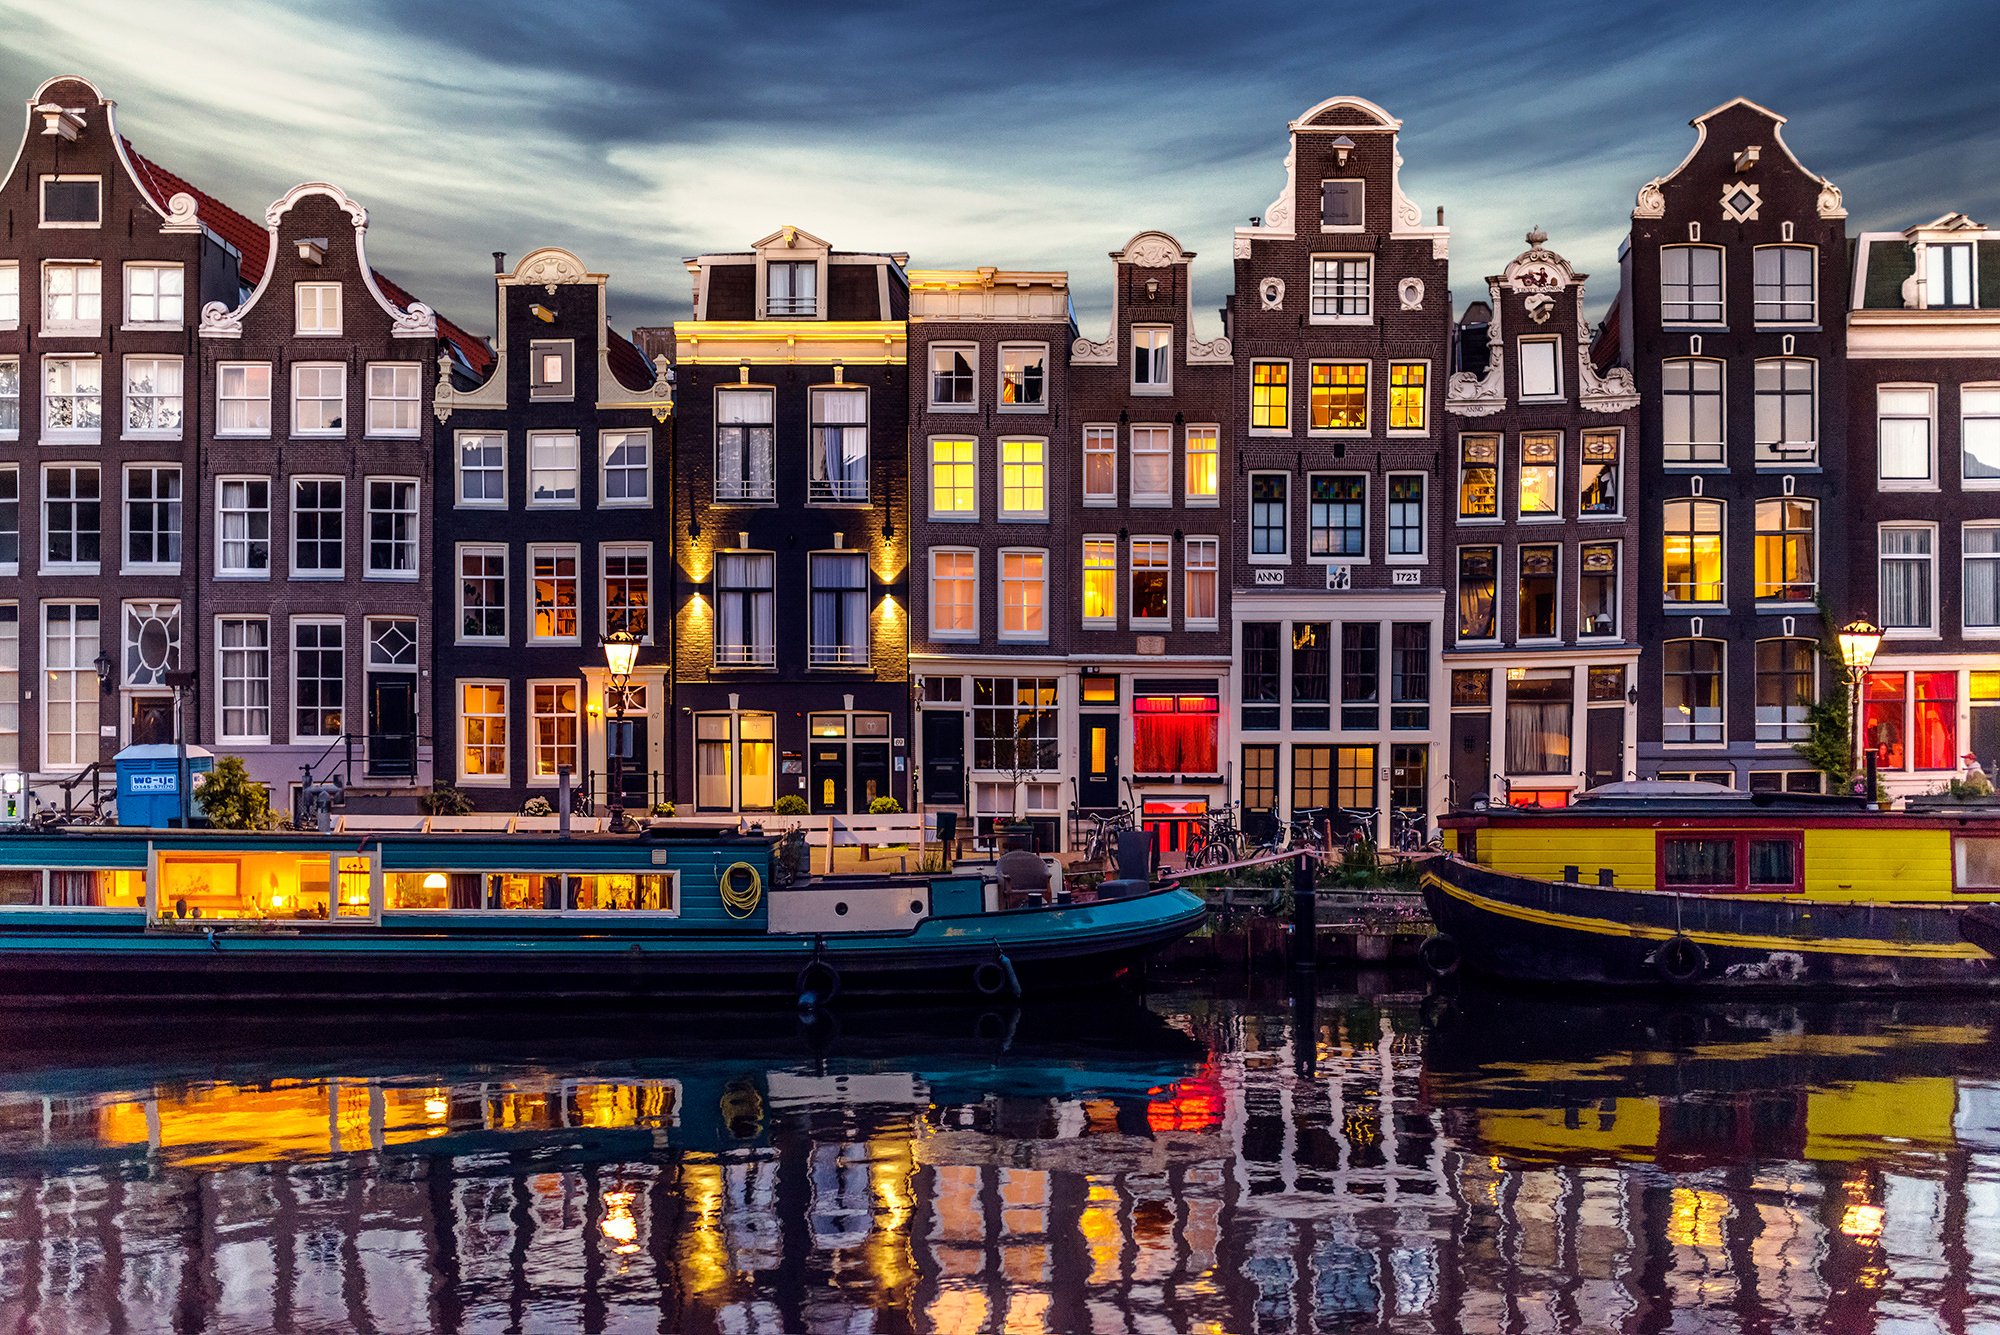 boat, amsterdam, man made, canal, city, house, netherlands, reflection, cities